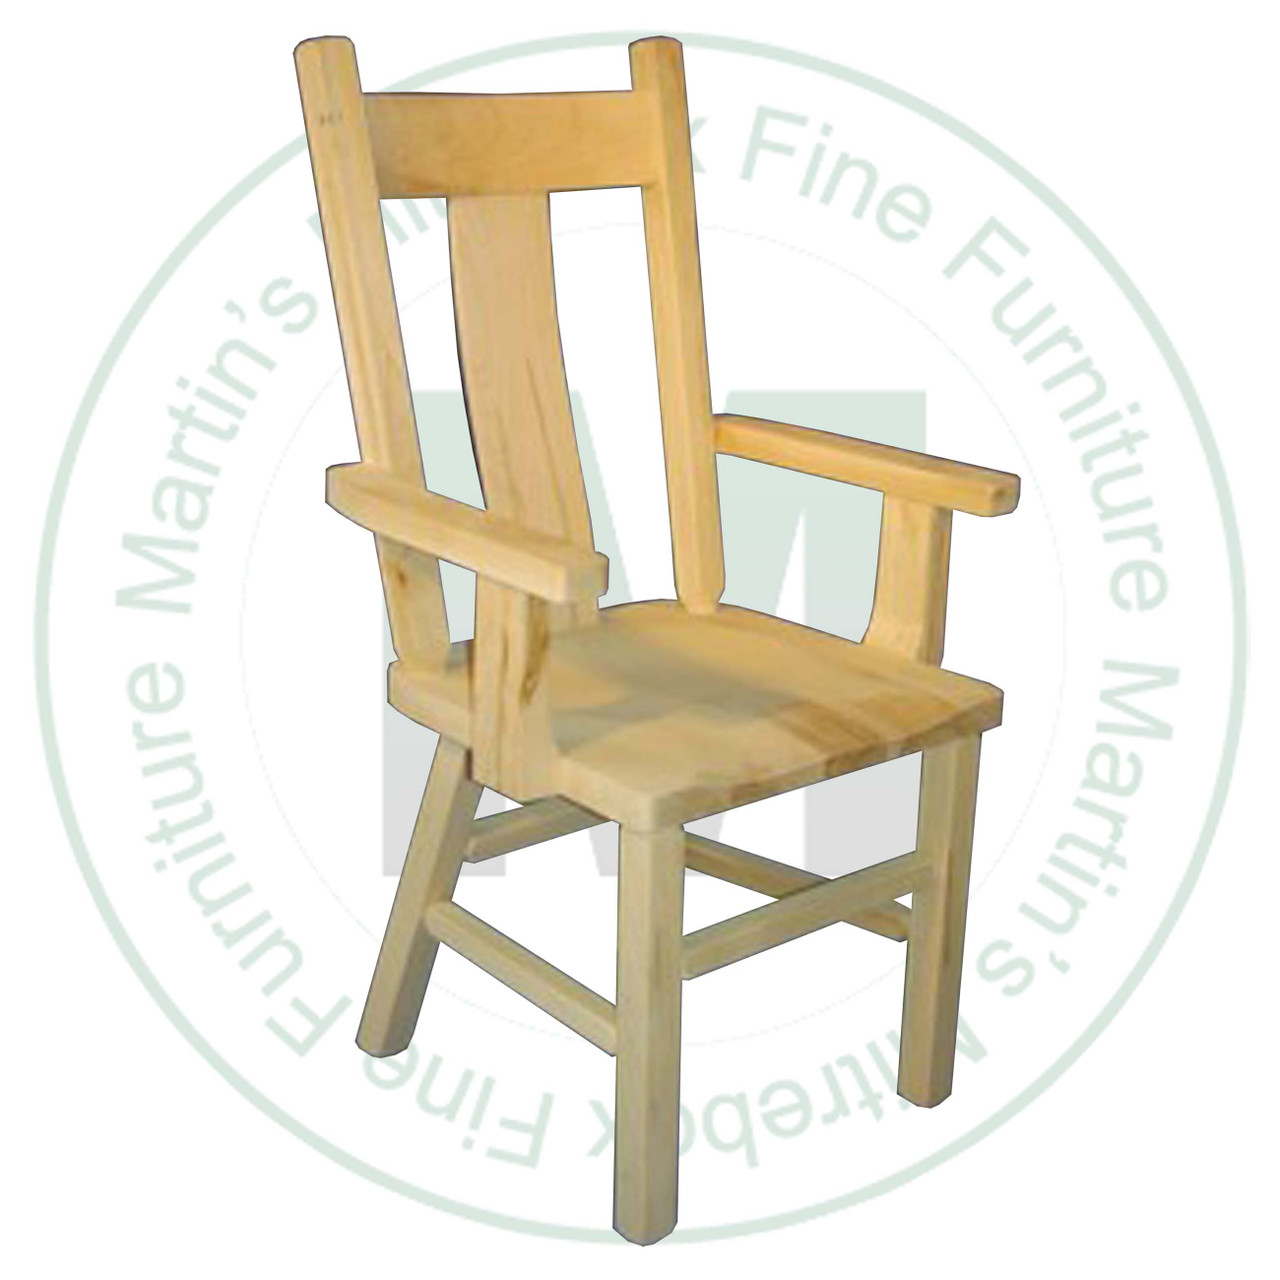 Wormy Maple Rustic Wide Slat Back Arm Chair With Wood Seat